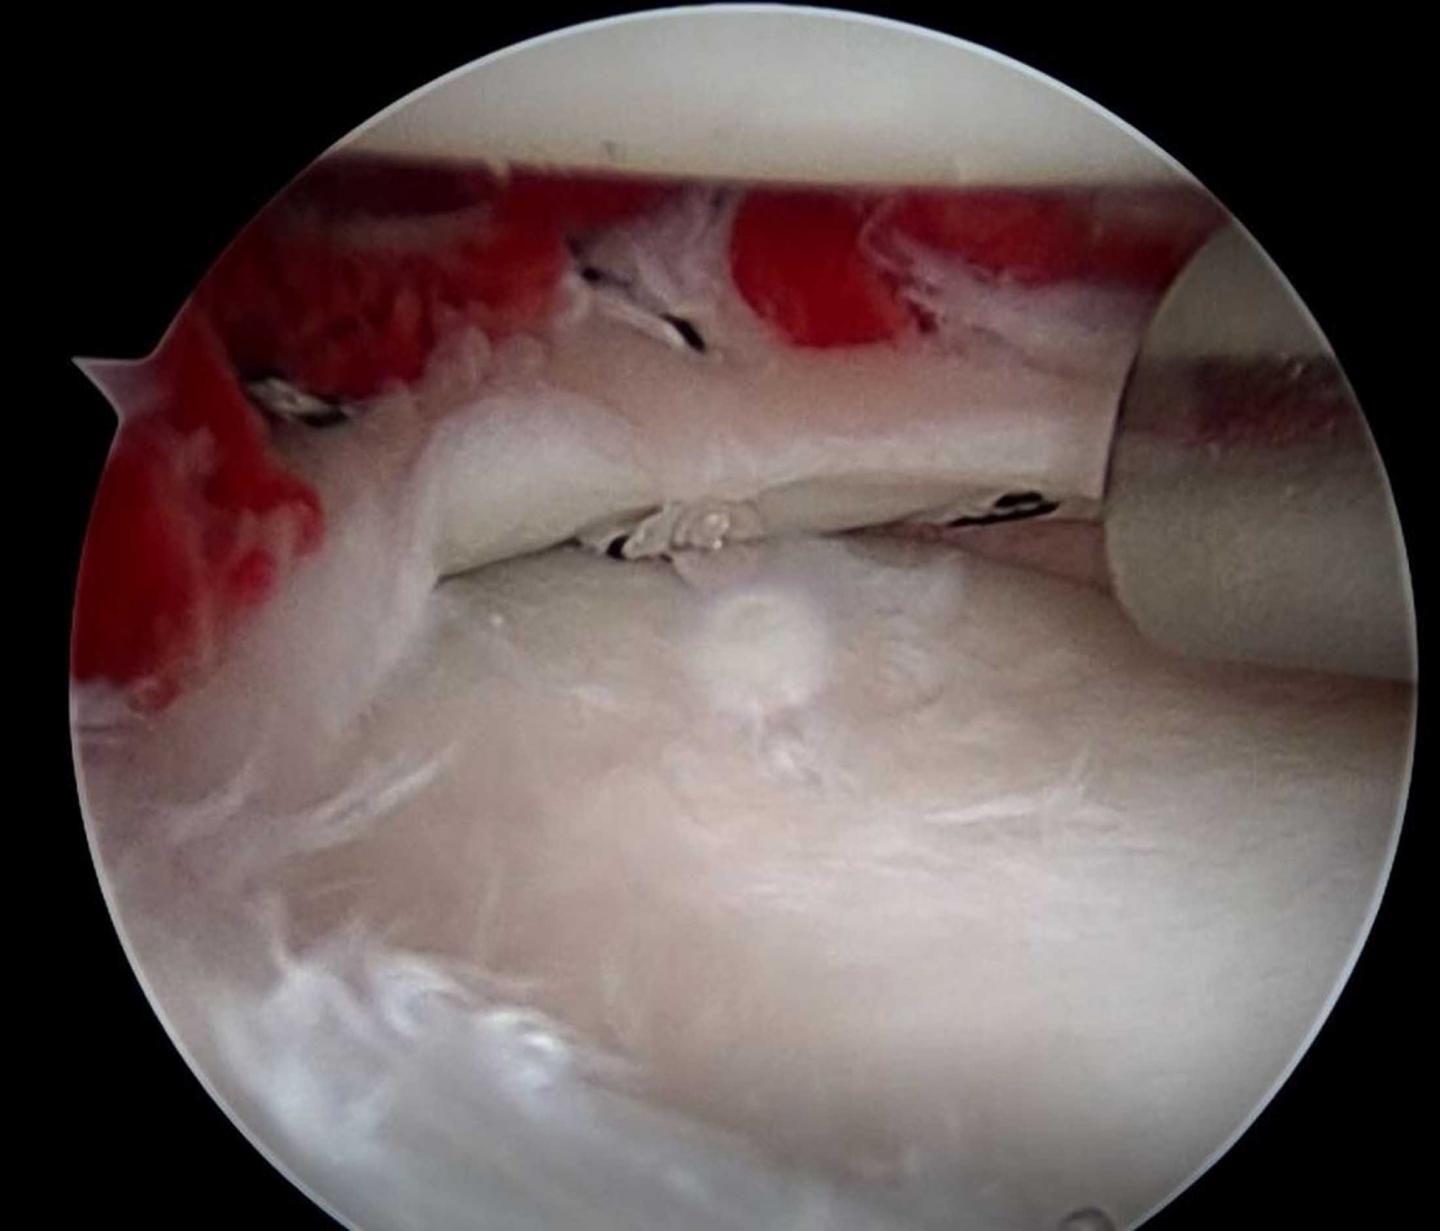 Red on white: fibrin clot on the repaired meniscus